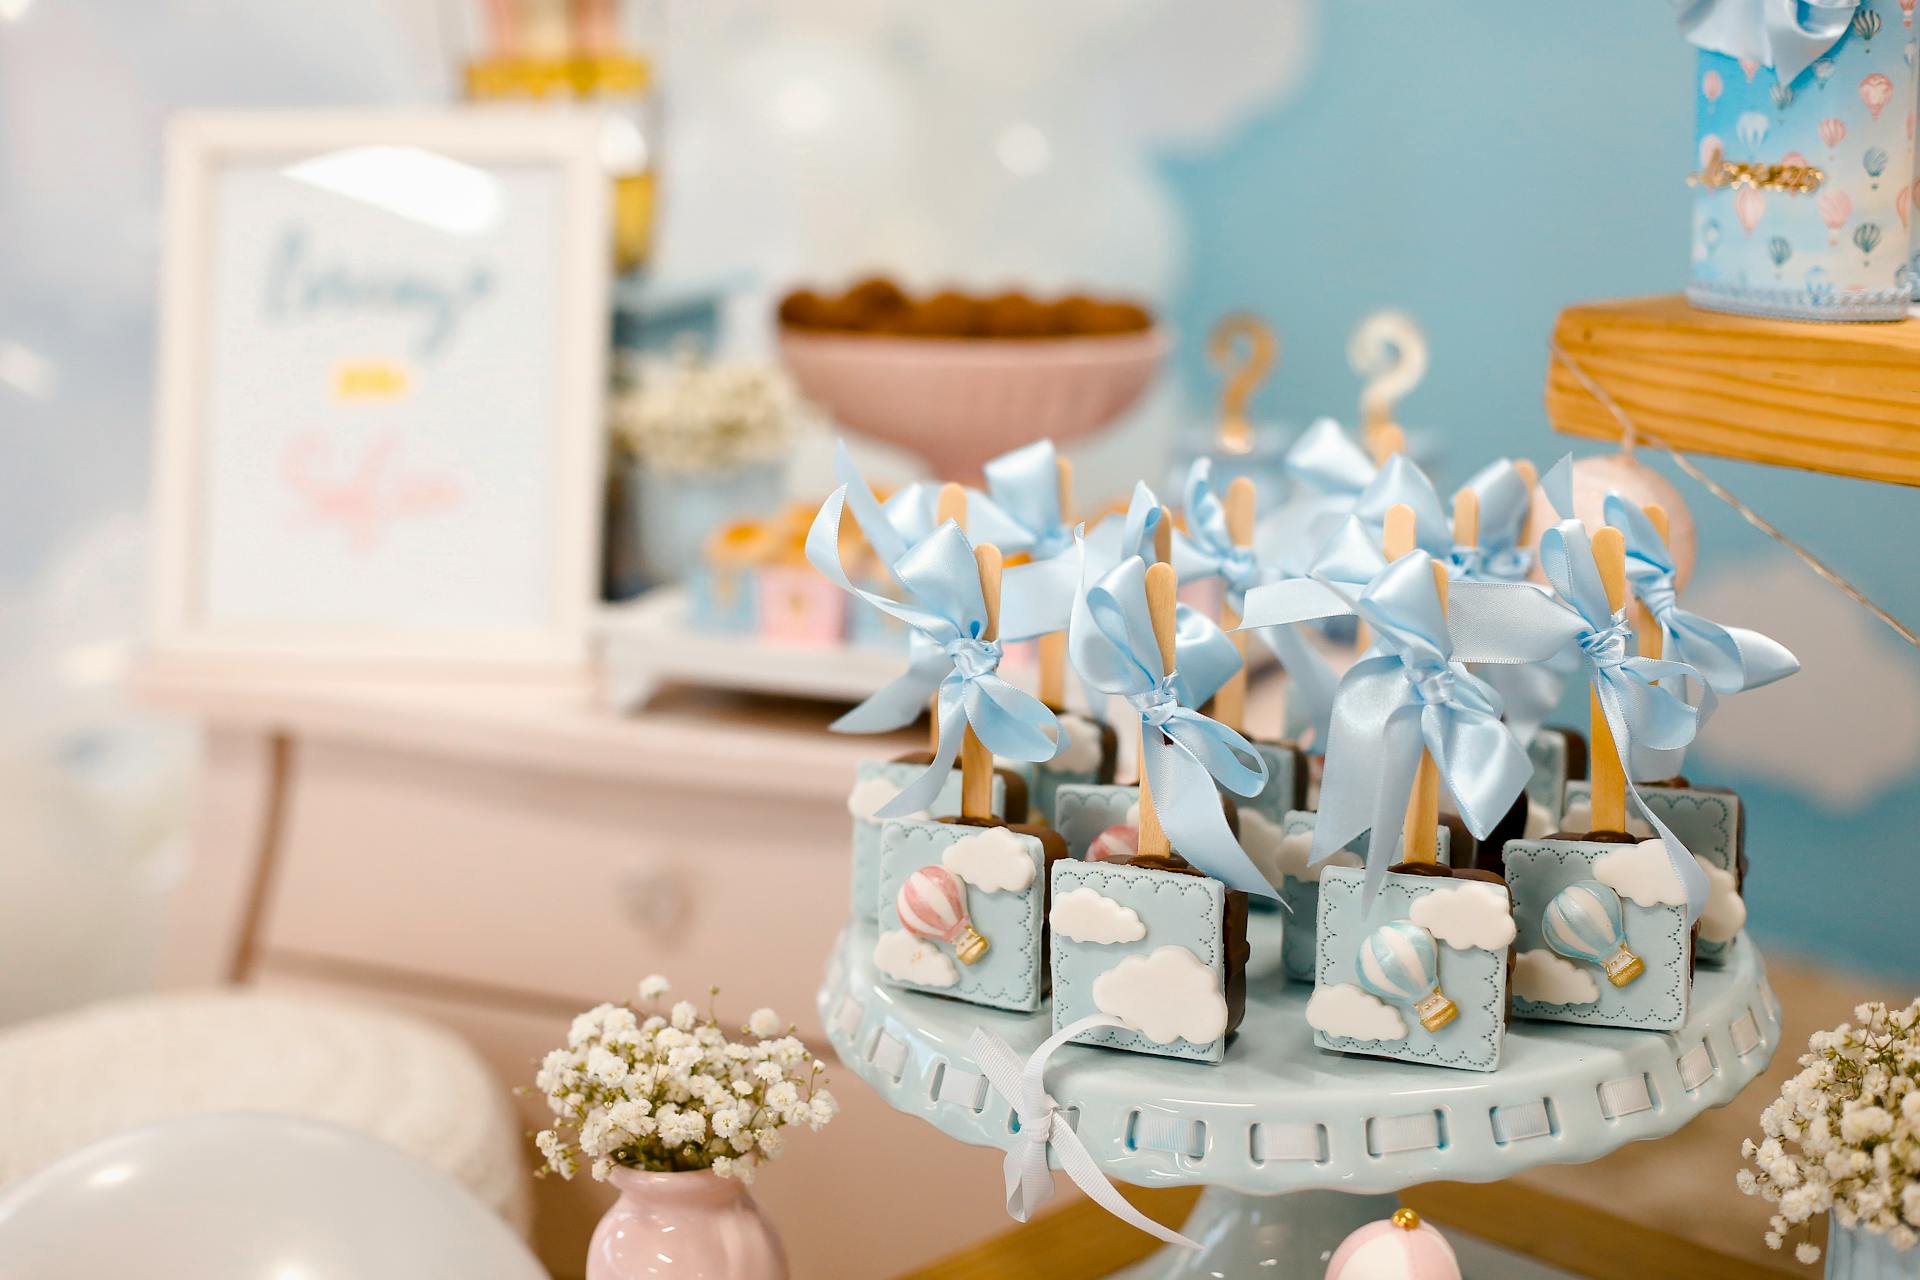 Favors at a baby shower | Source: Pexels